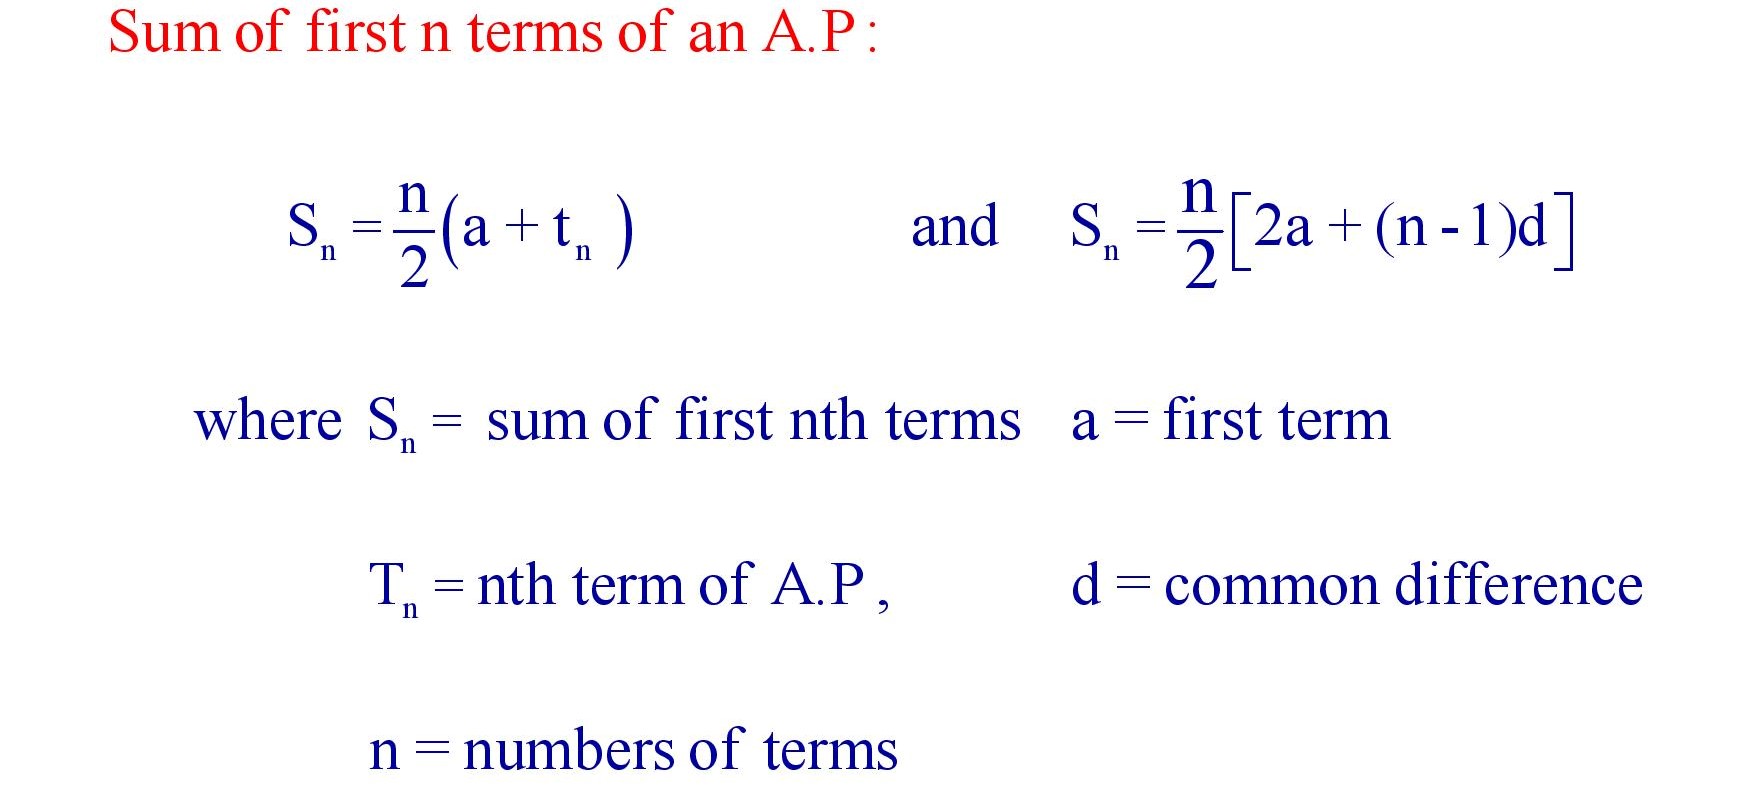 Sum of first n terms of an A.P